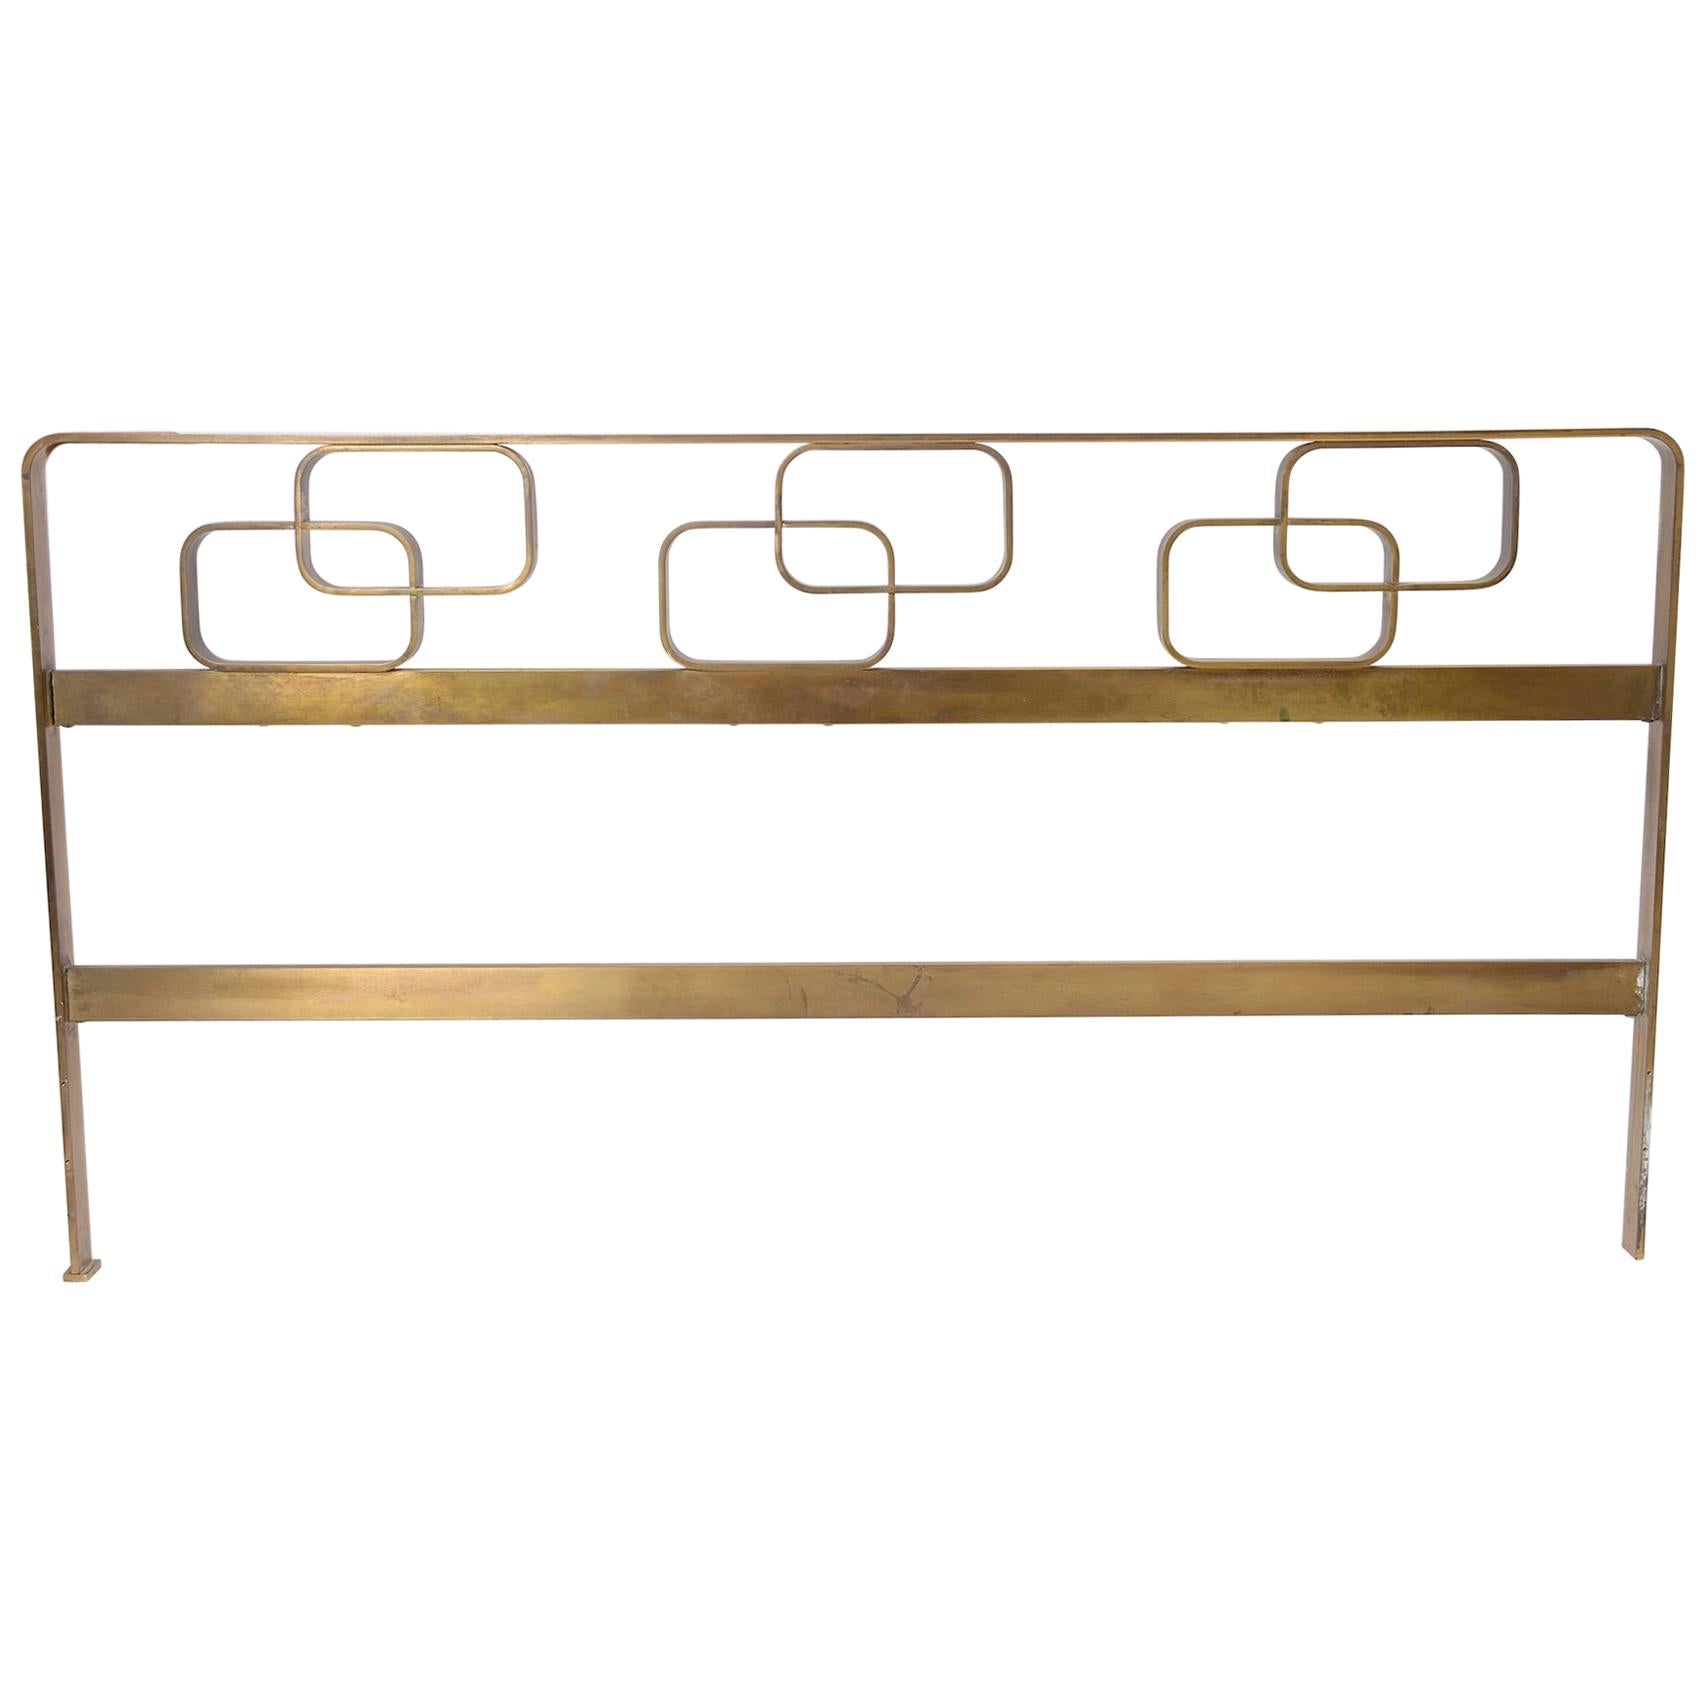 Sculptural, geometric Italian brass bed

Similar to Borsani or Frigerio brass beds of the time

Excellent quality 

Head and footboard with cross bars present.

Height of headboard is 95cm.

 